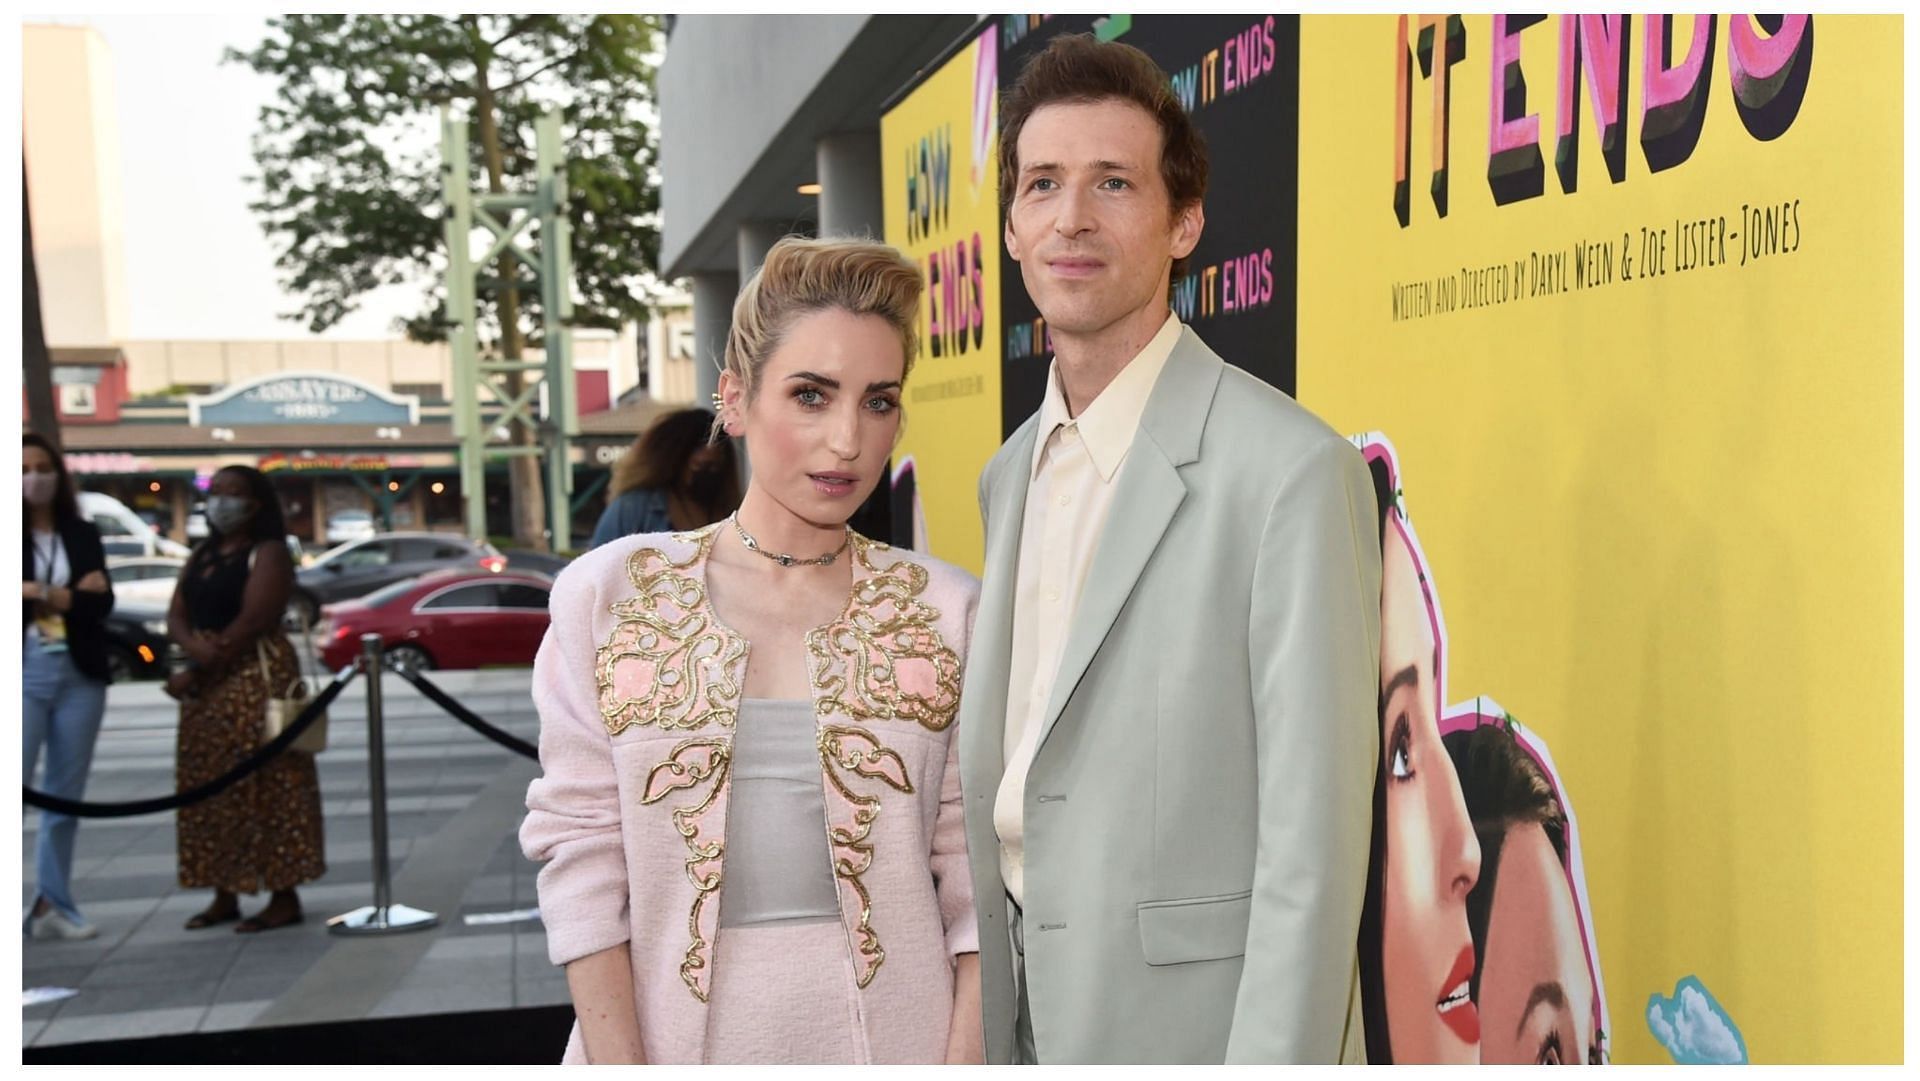 Zoe Lister-Jones and Daryl Wein are getting divorced (Image via Alberto E. Rodriguez/Getty Images)